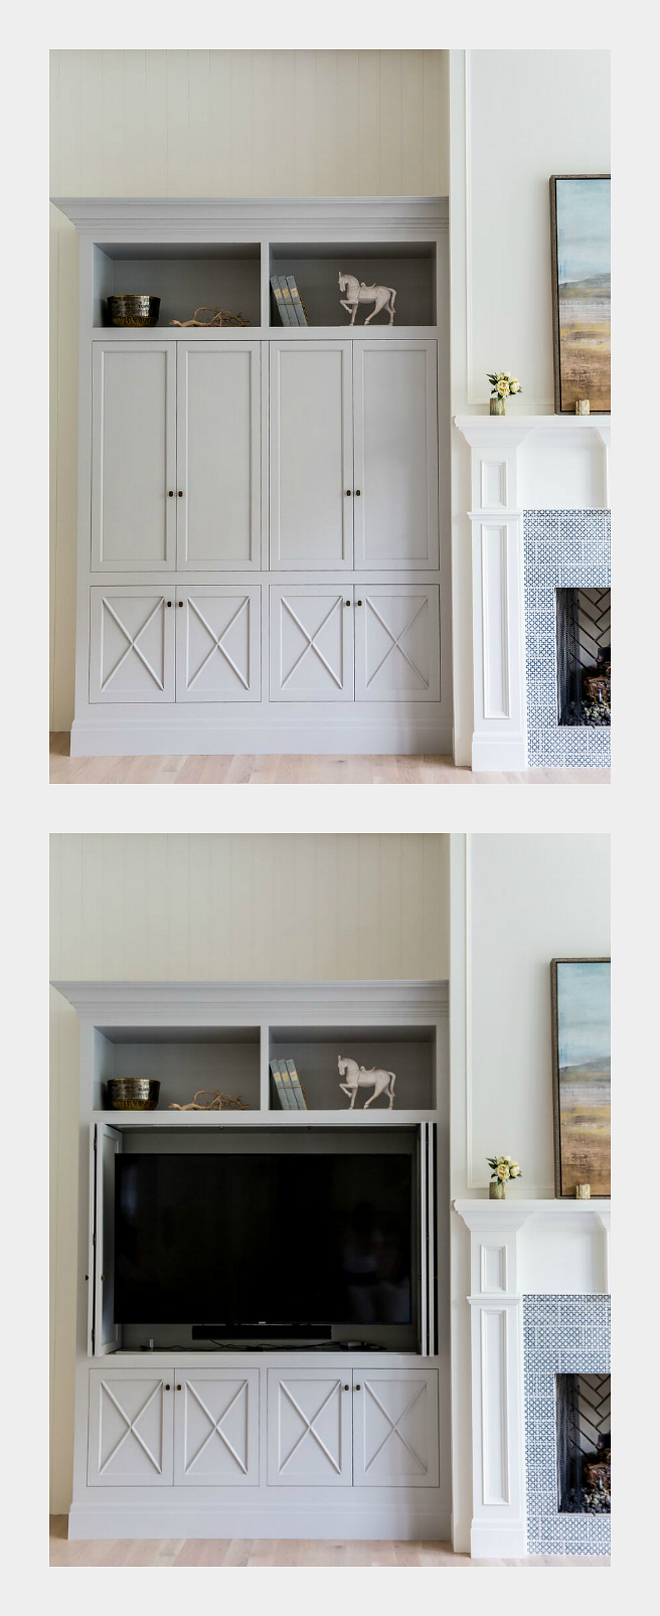 Family room media cabinet. Accordion doors allow this cabinet to perfectly tuck all electronics away from sight when not in use. Family room media cabinet. Family room media cabinet. Family room media cabinet. Family room media cabinet #Familyroom #mediacabinet Caitlin Creer Interiors. C. S. Cabinetry & Design